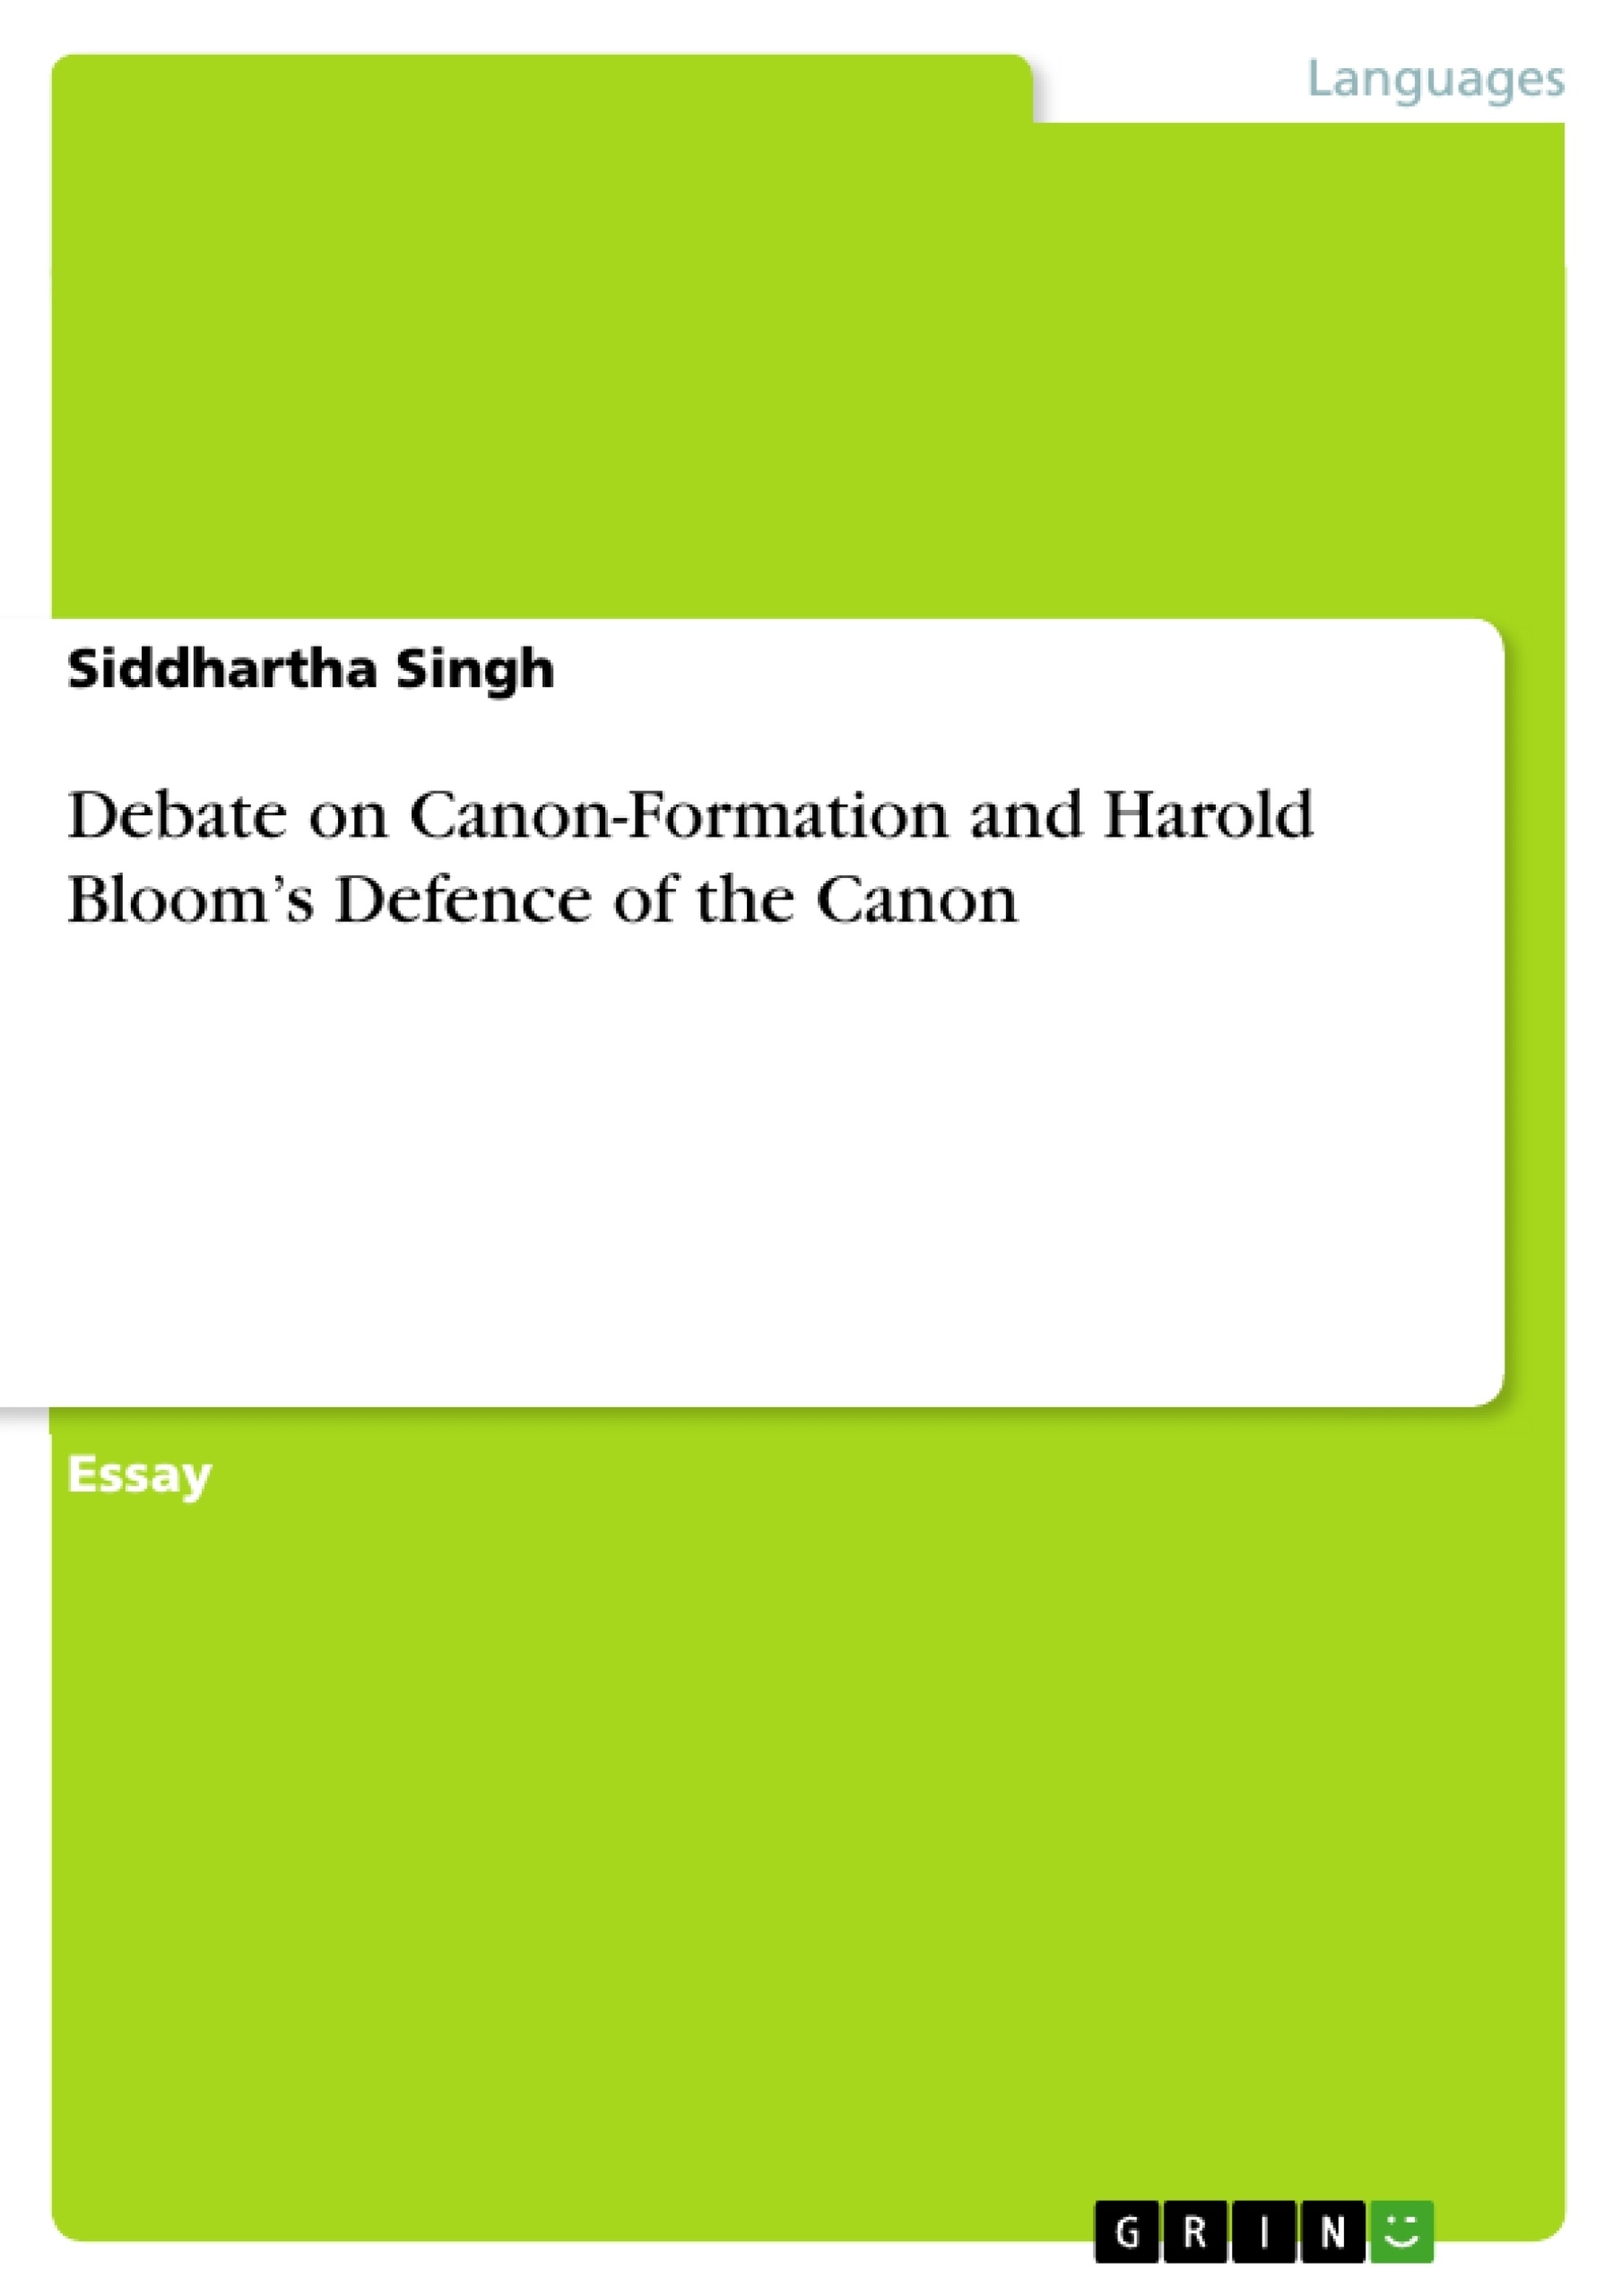 Title: Debate on Canon-Formation and Harold Bloom’s Defence of the Canon